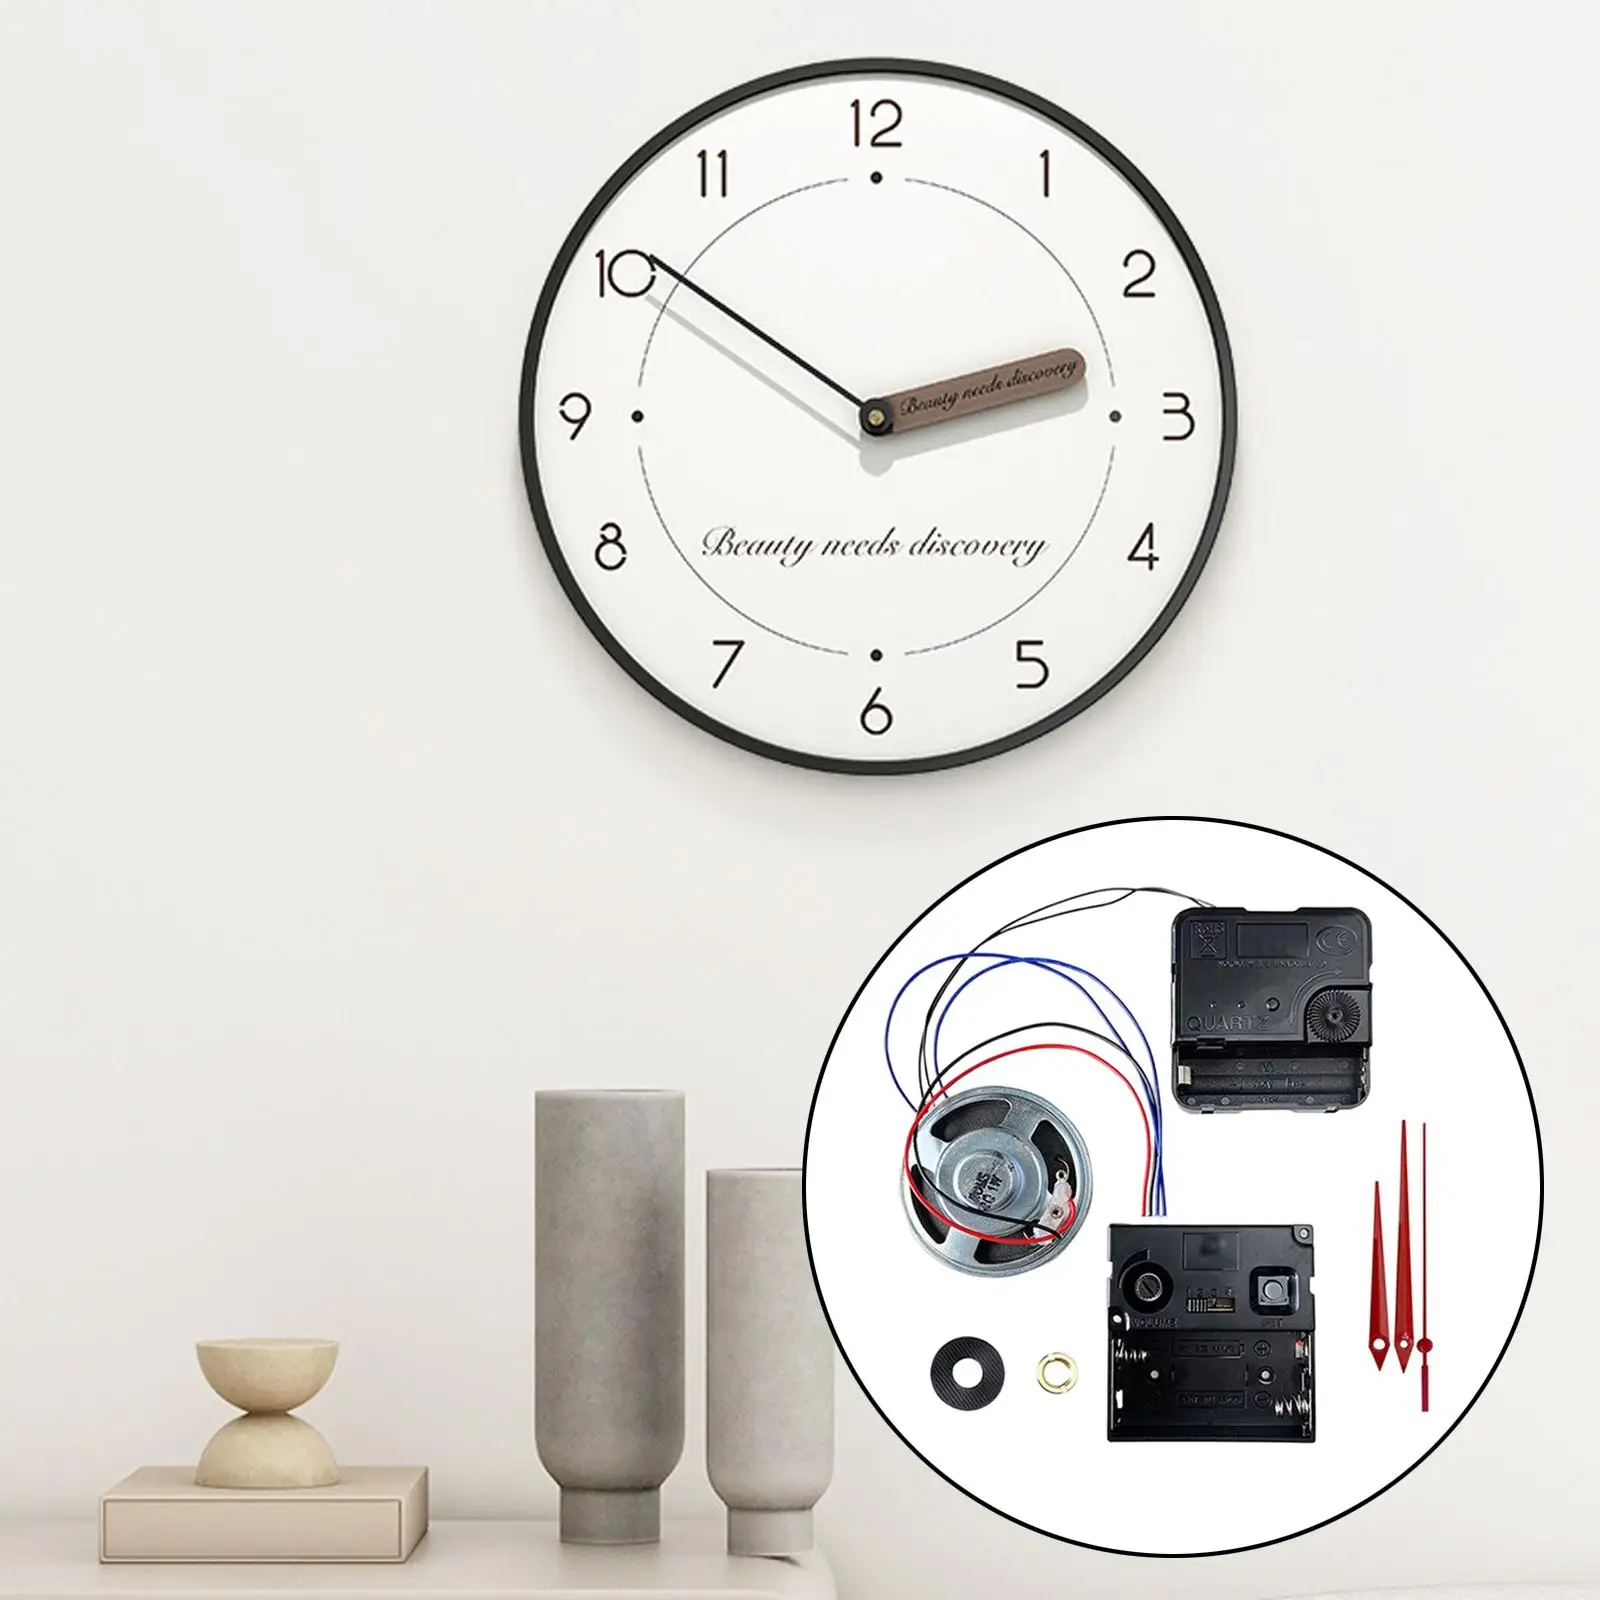 DIY Wall Clock Movement Mechanism with Hour Minute Second Hands, Wall Clock